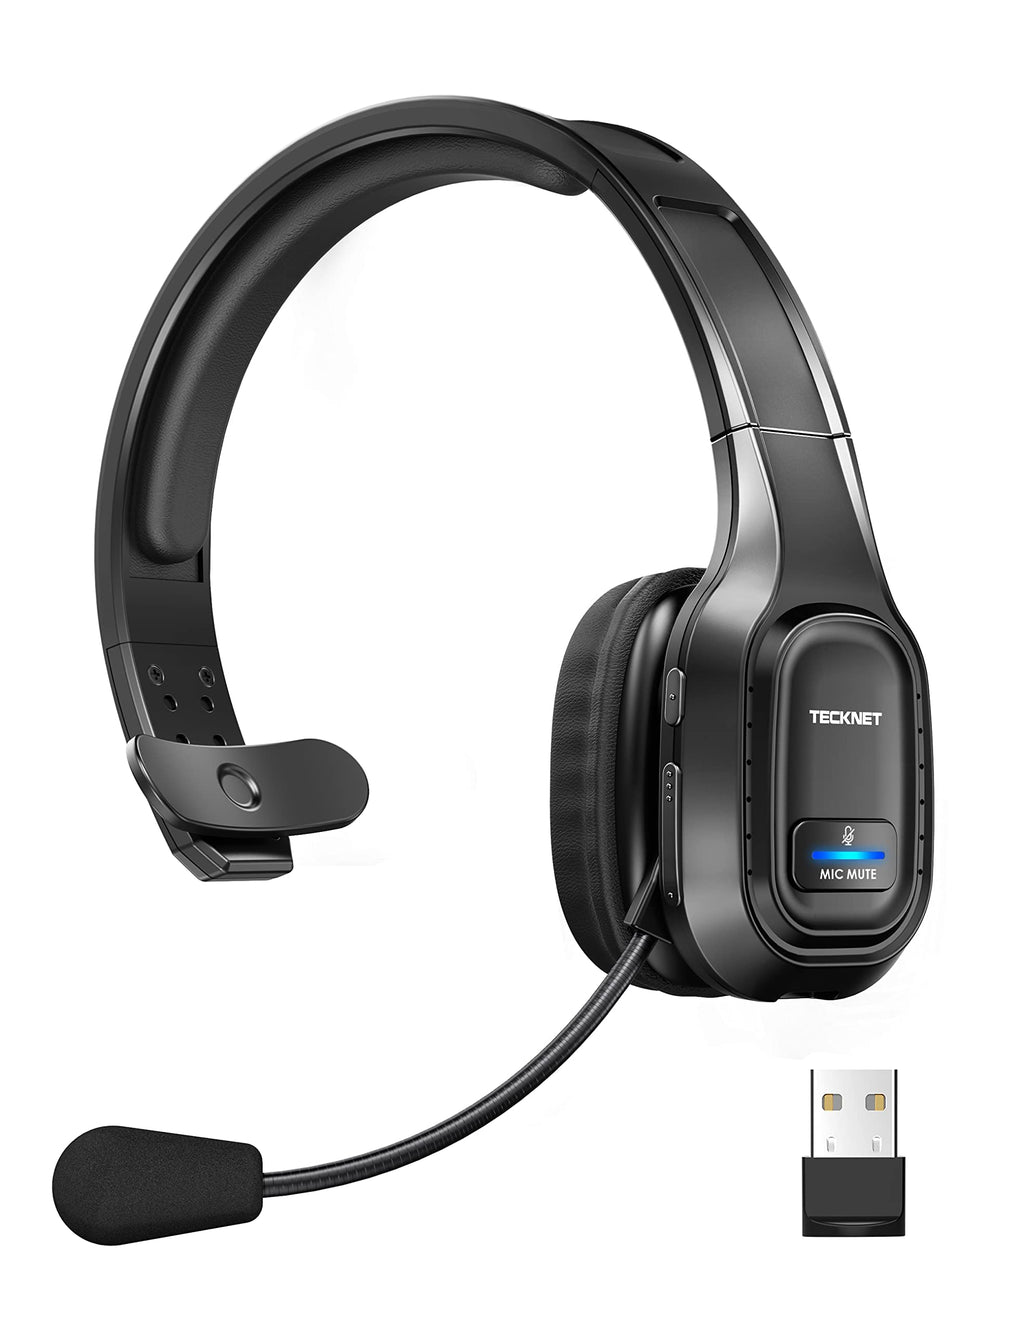  [AUSTRALIA] - TECKNET Trucker Bluetooth Headset with Microphone Noise Canceling Wireless On Ear Headphones, 55H Hands Free Wireless Headset for Cell Phone Computer Office Home Call Center Skype (Black) Black